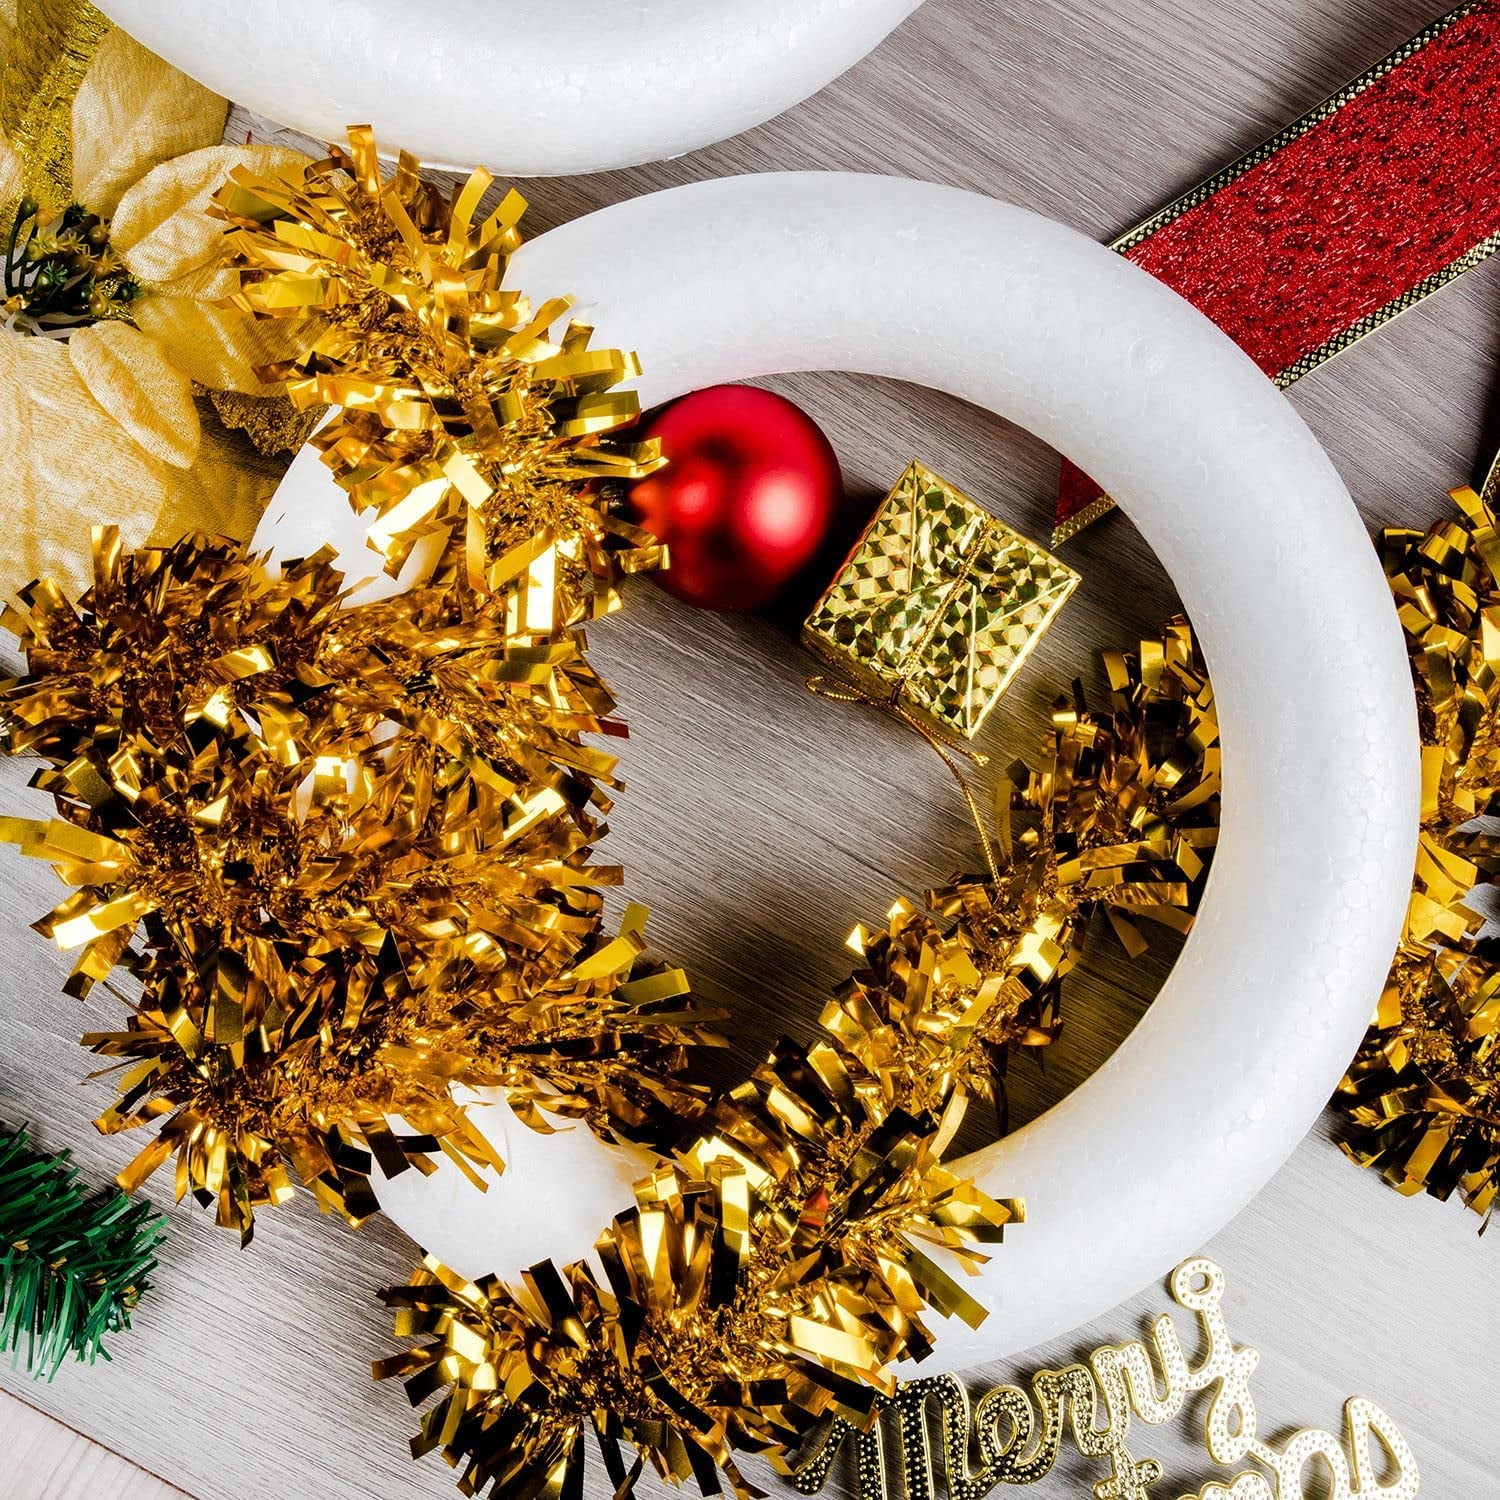 The Penny Parlor: Foam Tubing Wreath Form Frustrations